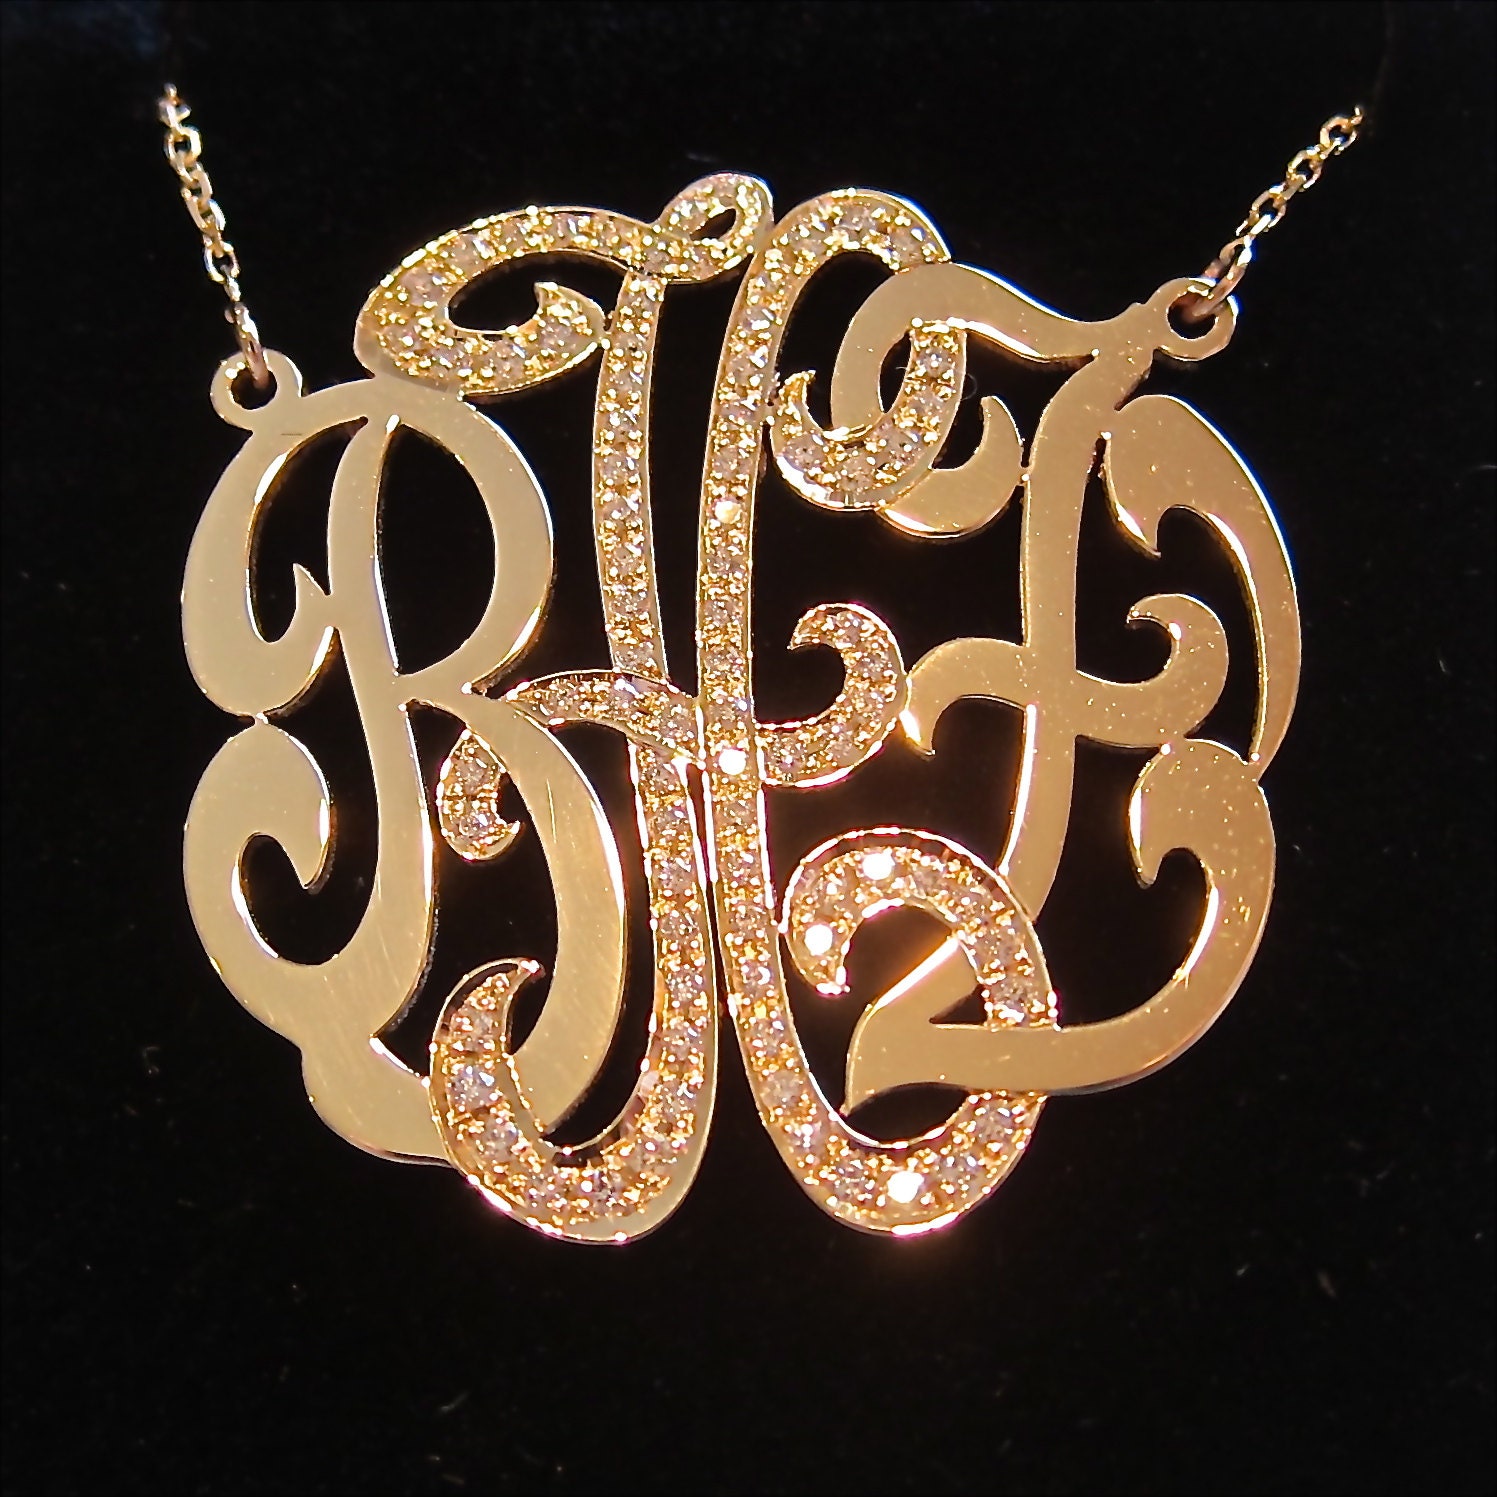 Medium 14k Gold Monogram Necklace with Diamond Middle Initial